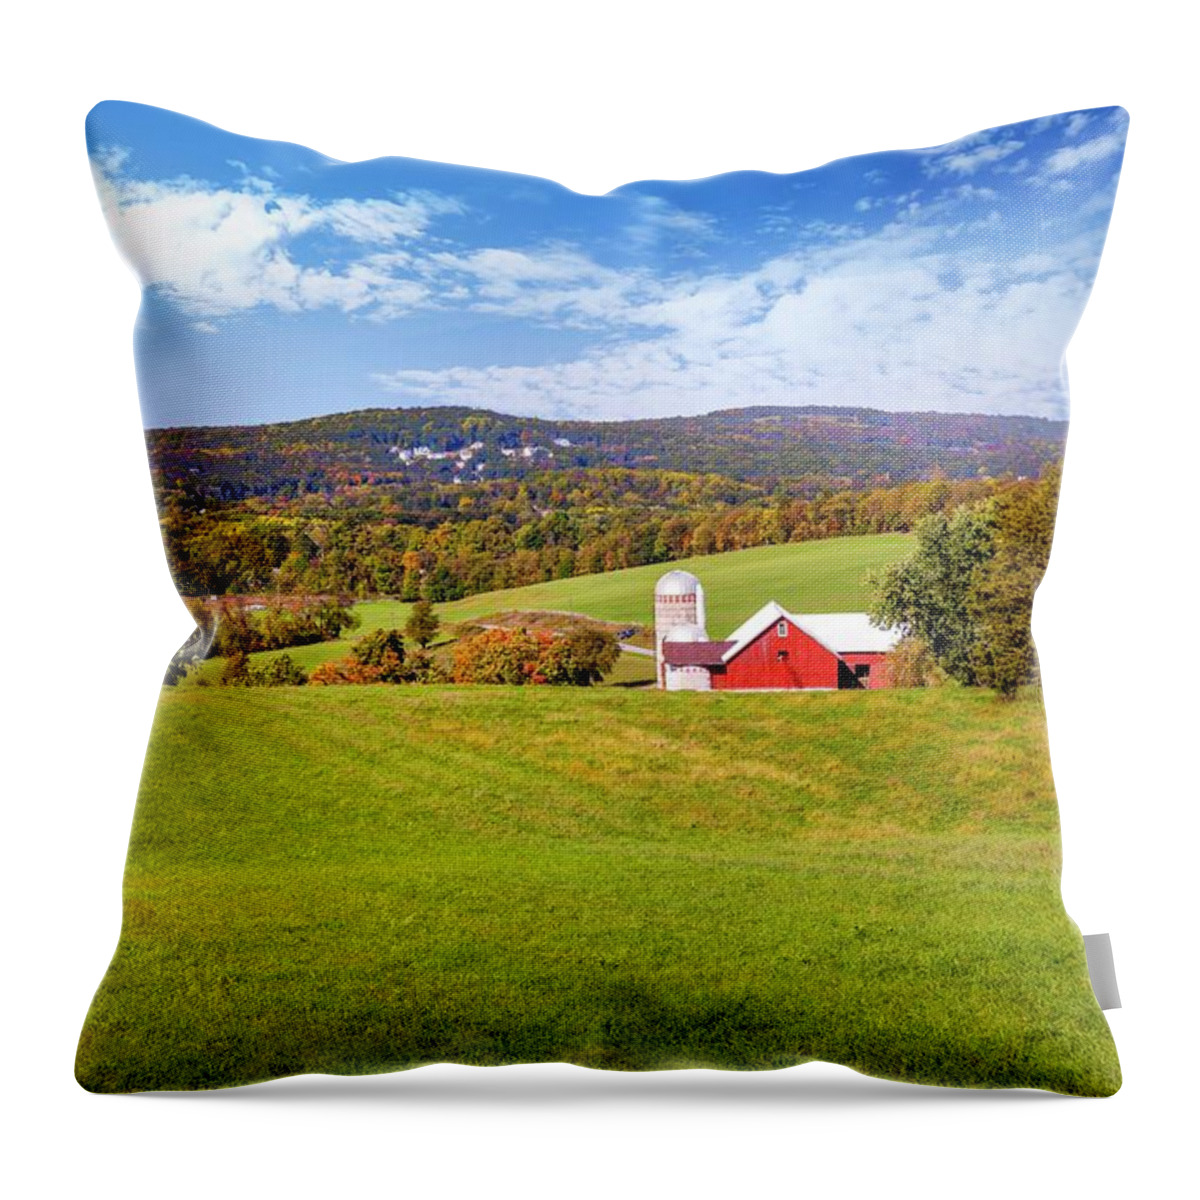 Estock Throw Pillow featuring the digital art Farm With Barn & Silos, Warwick, Ny #3 by Lumiere